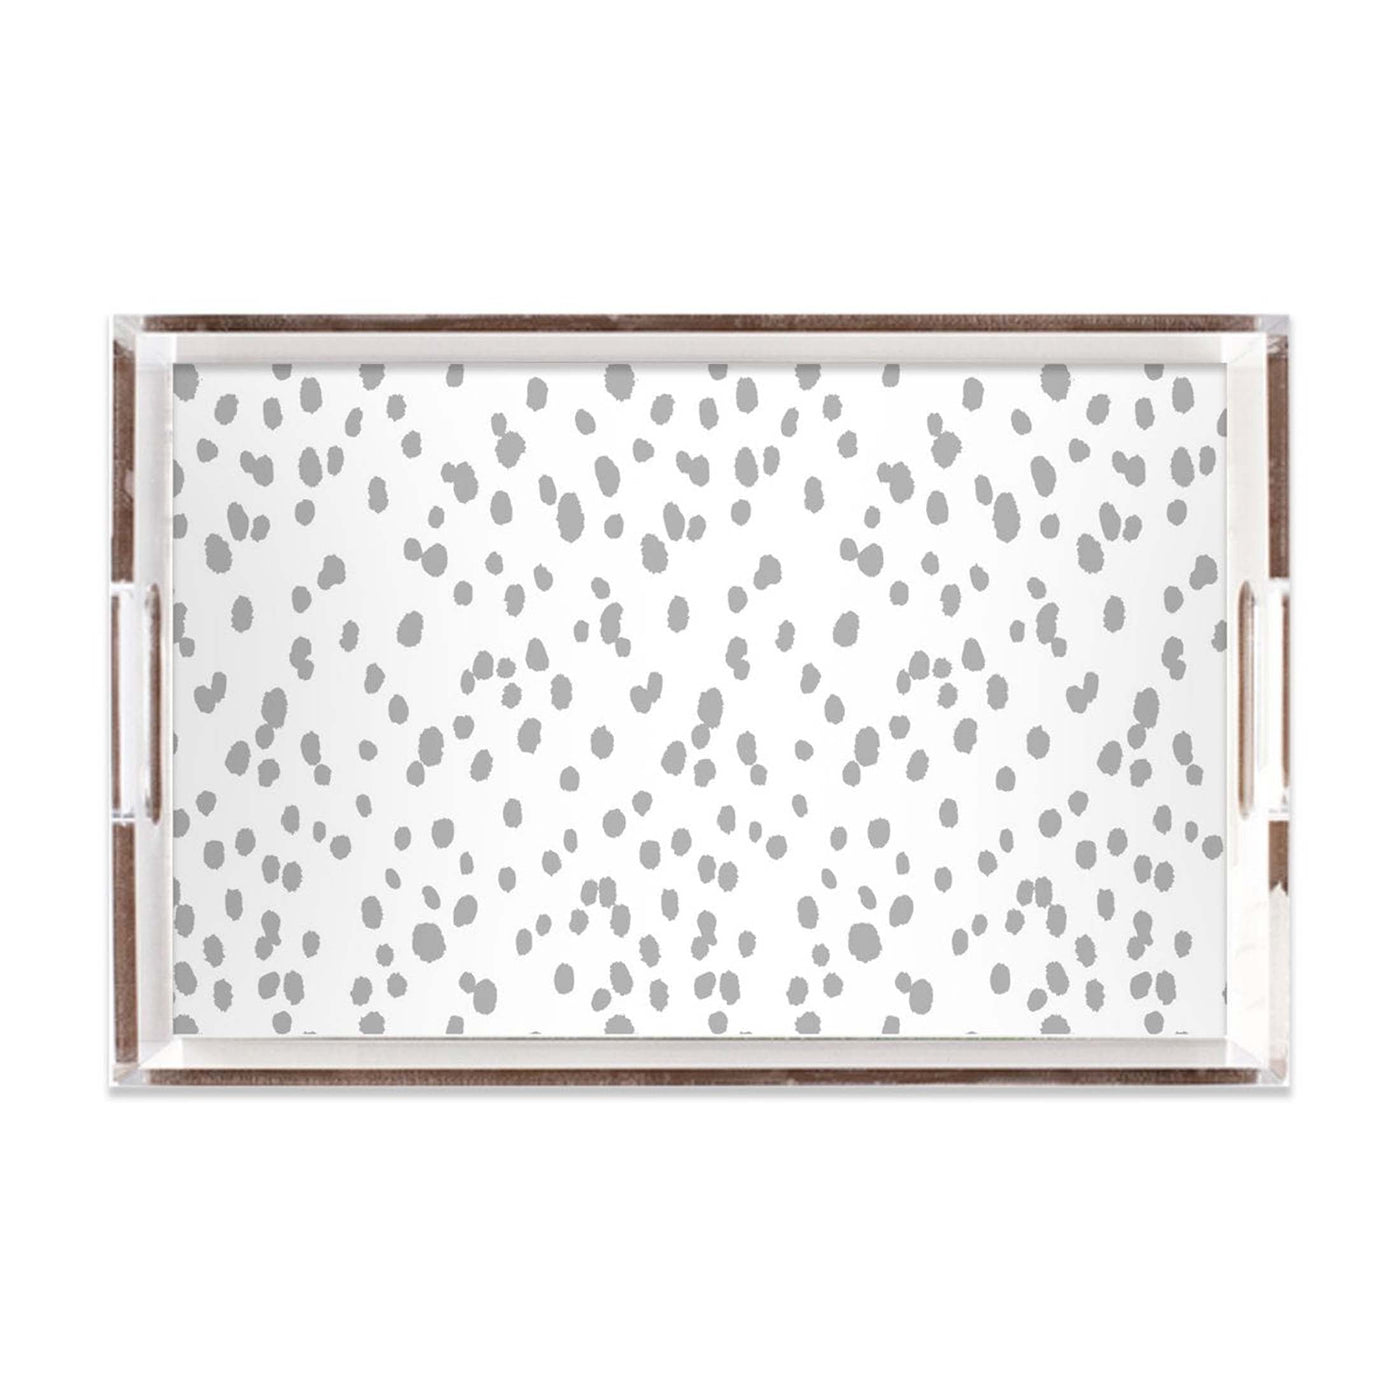 Seeing Spots Lucite Tray Lucite Trays Grey / 11x17 Katie Kime